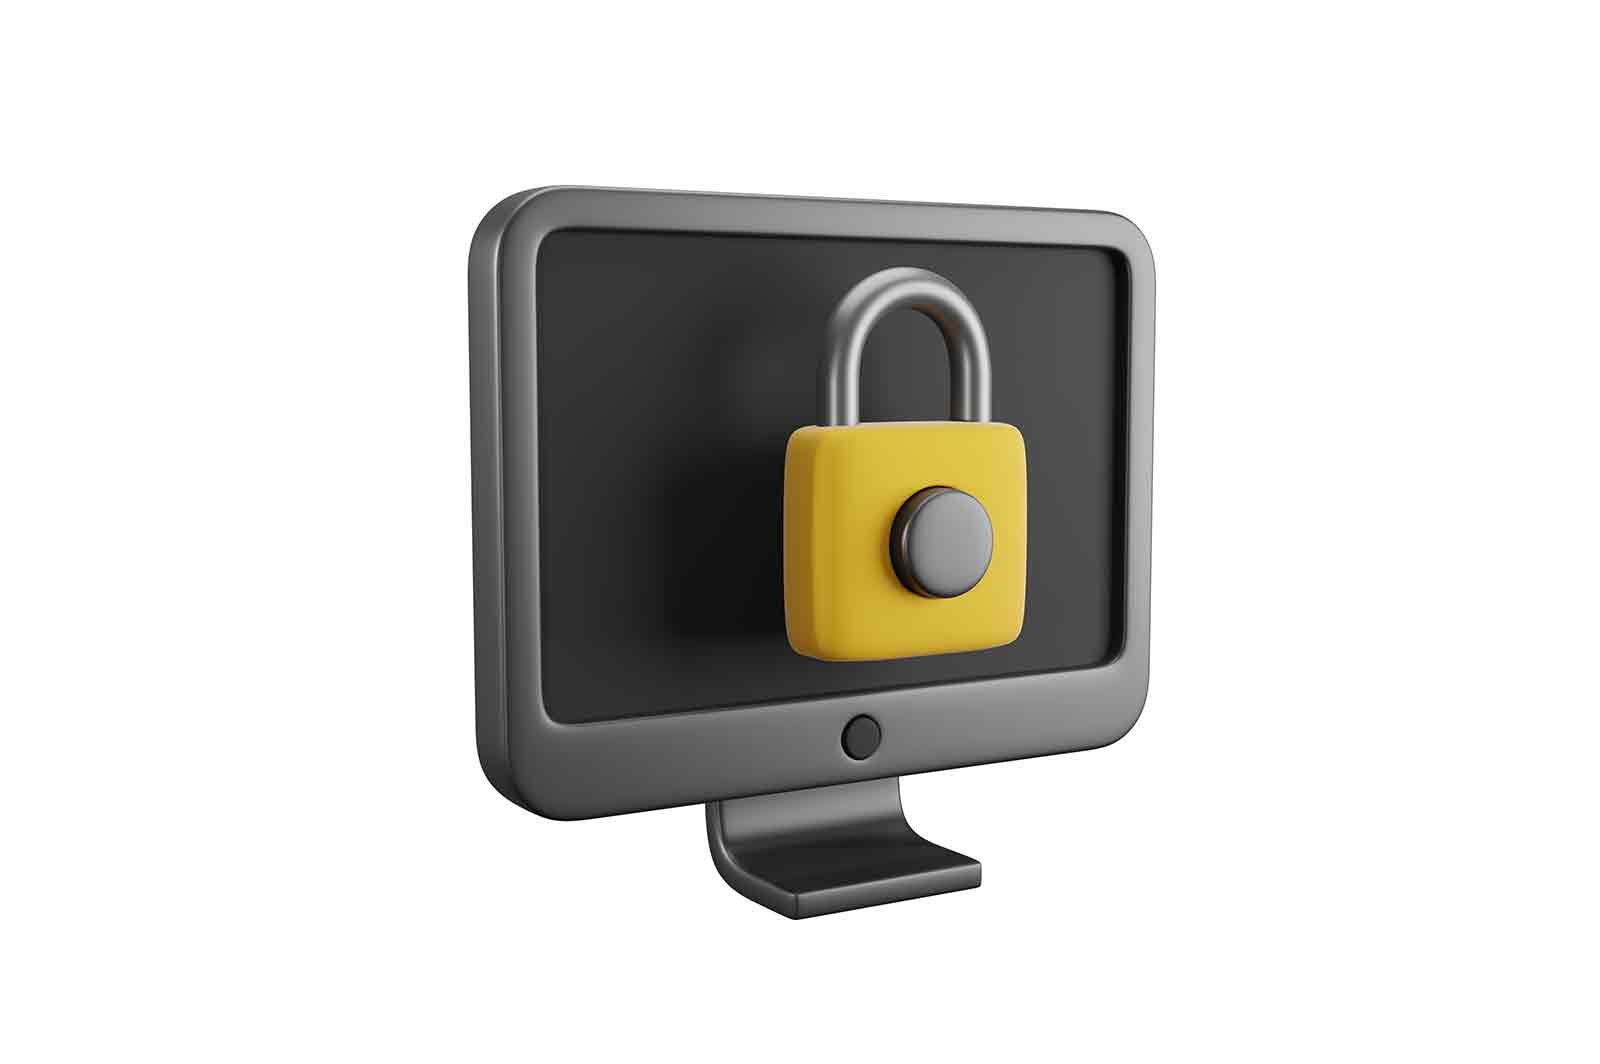 Pc monitor with closed padlock, internet security and virus protection web technology icon 3d rendered illustration.